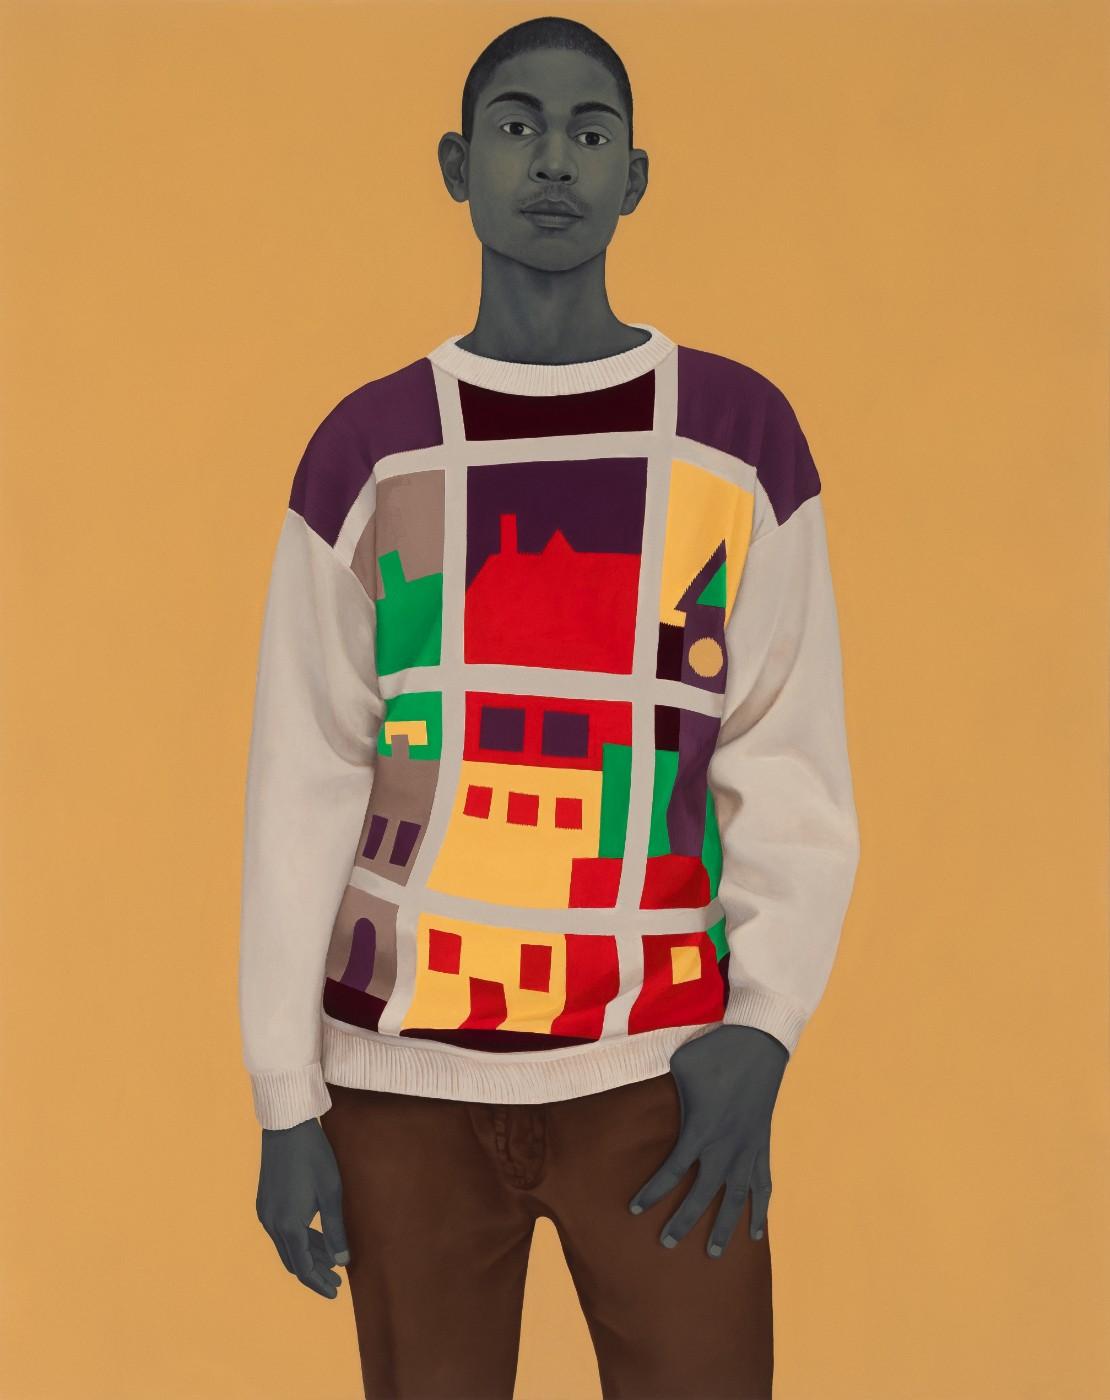 Amy SHerald, A single man in possession of a good fortune, 2019.